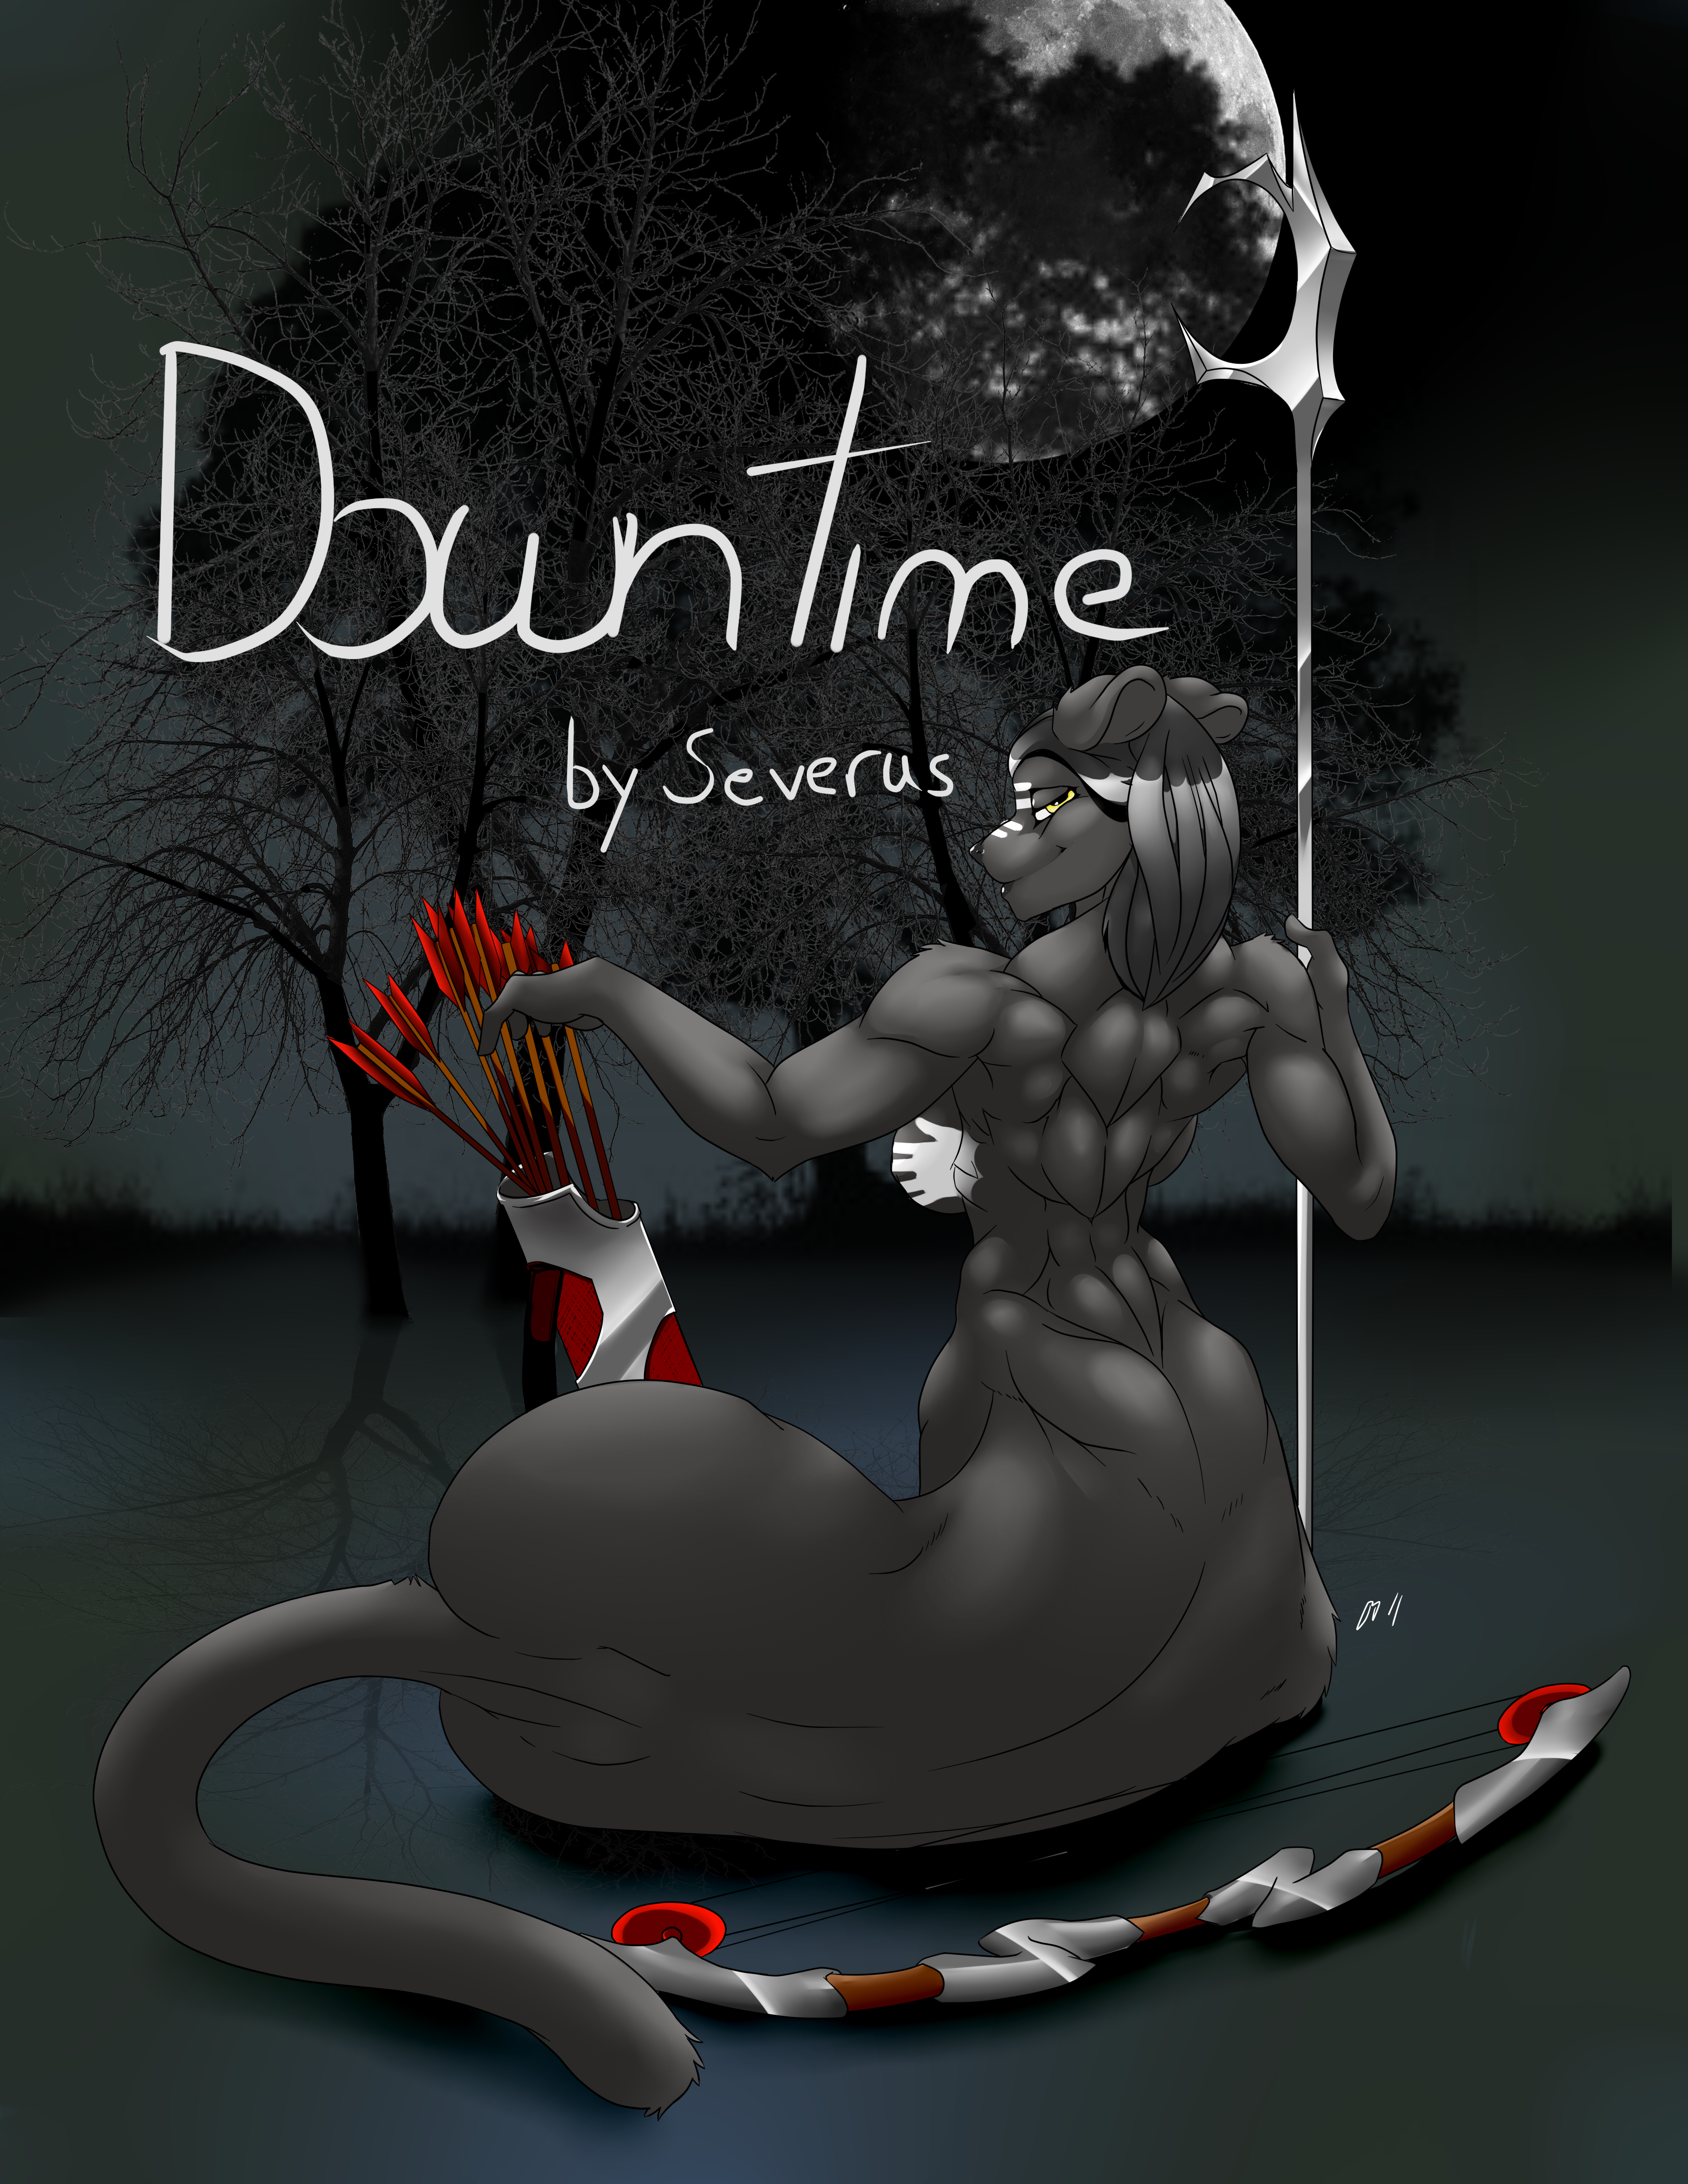 Downtime00